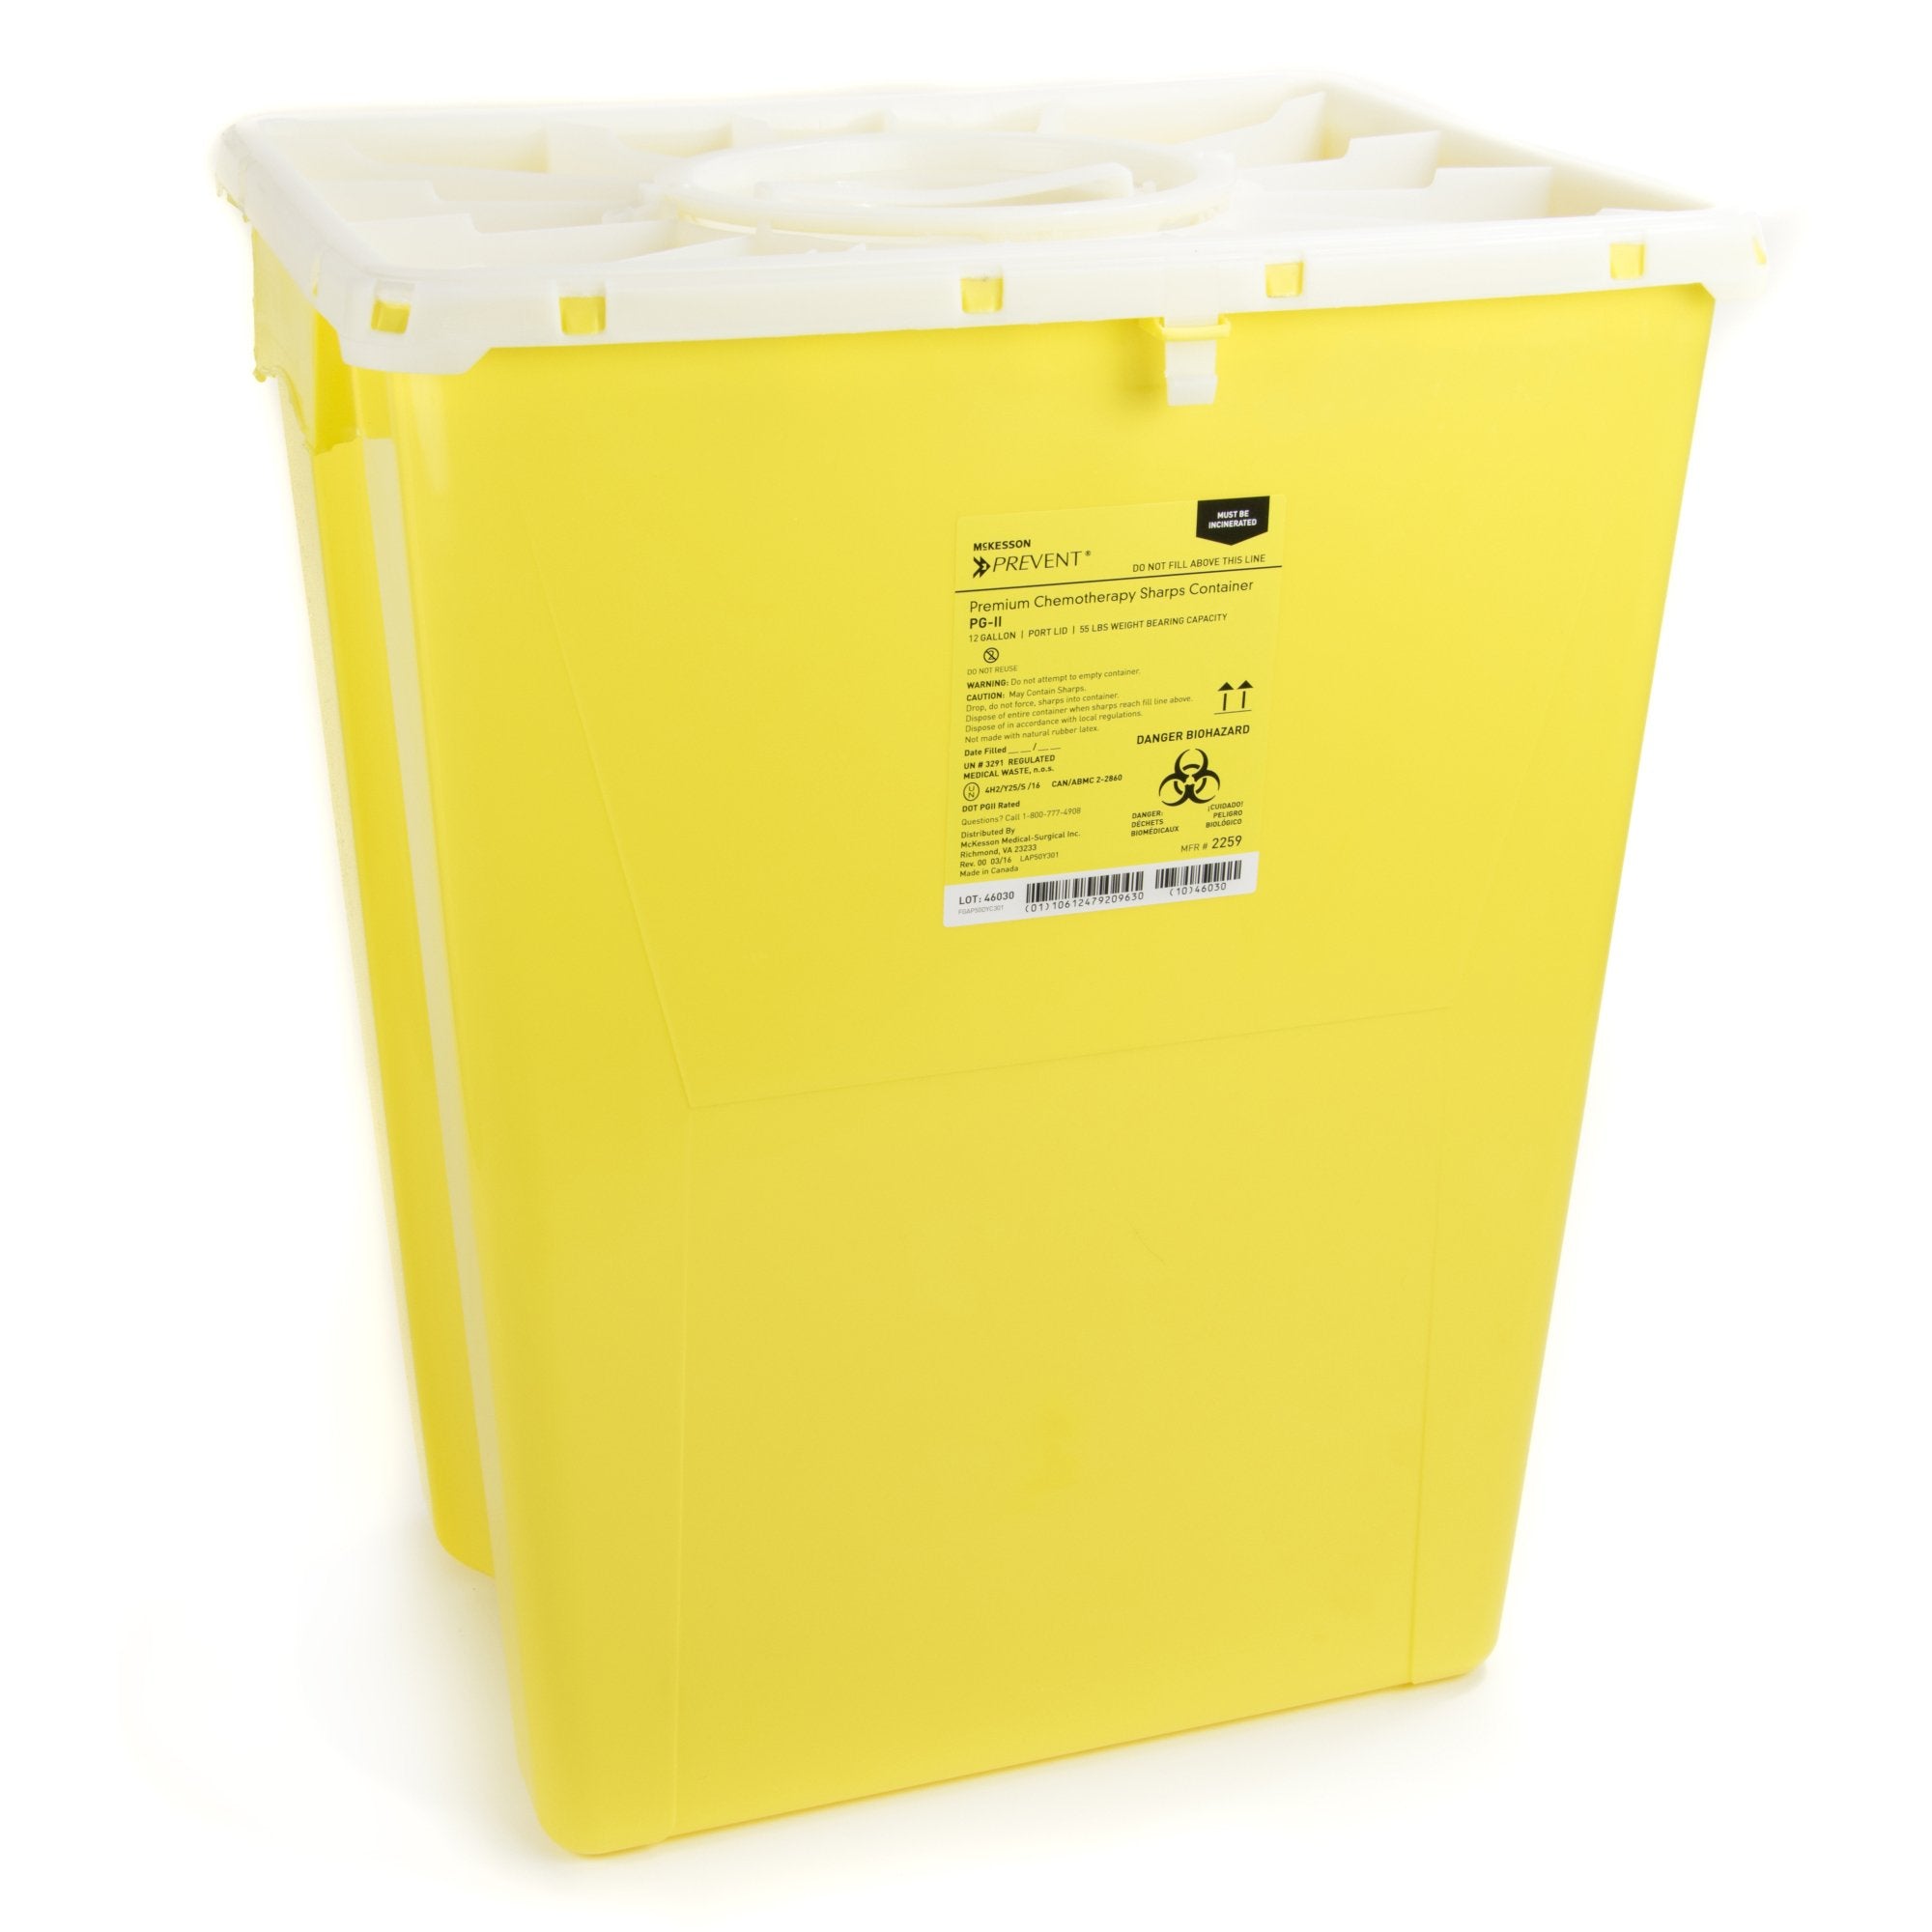 Chemotherapy Waste Container McKesson Prevent® Yellow Base 20-4/5 H X 17-3/10 W X 13 L Inch Vertical Entry 12 Gallon